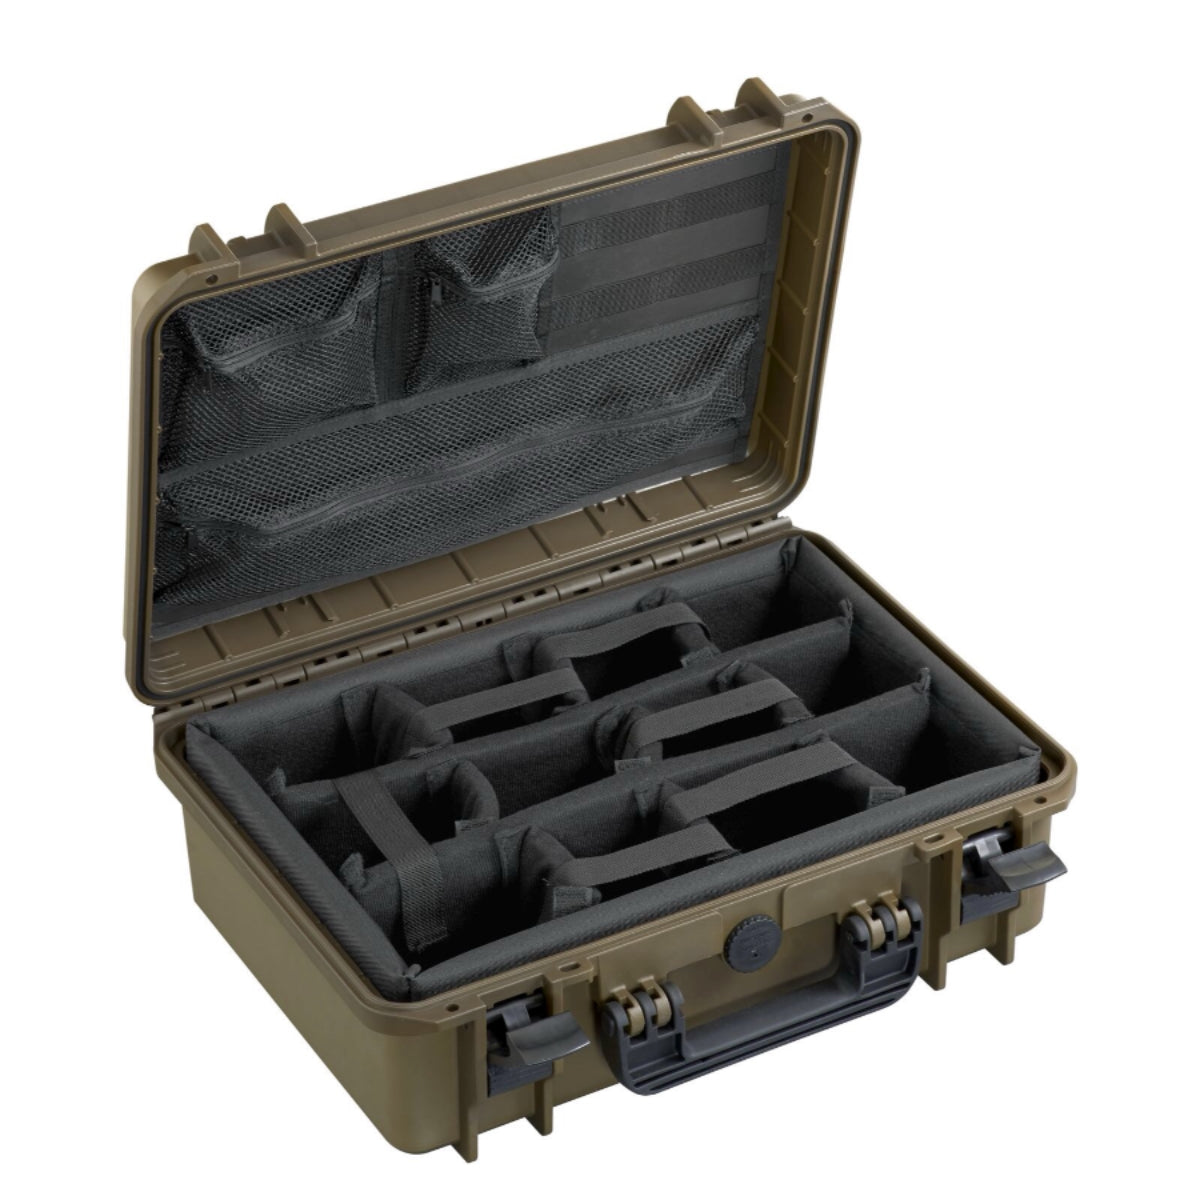 SP PRO 430CAMORG Sahara Carry Case, Padded Dividers + Lid Organizer, ID: L426xW290xH159mm